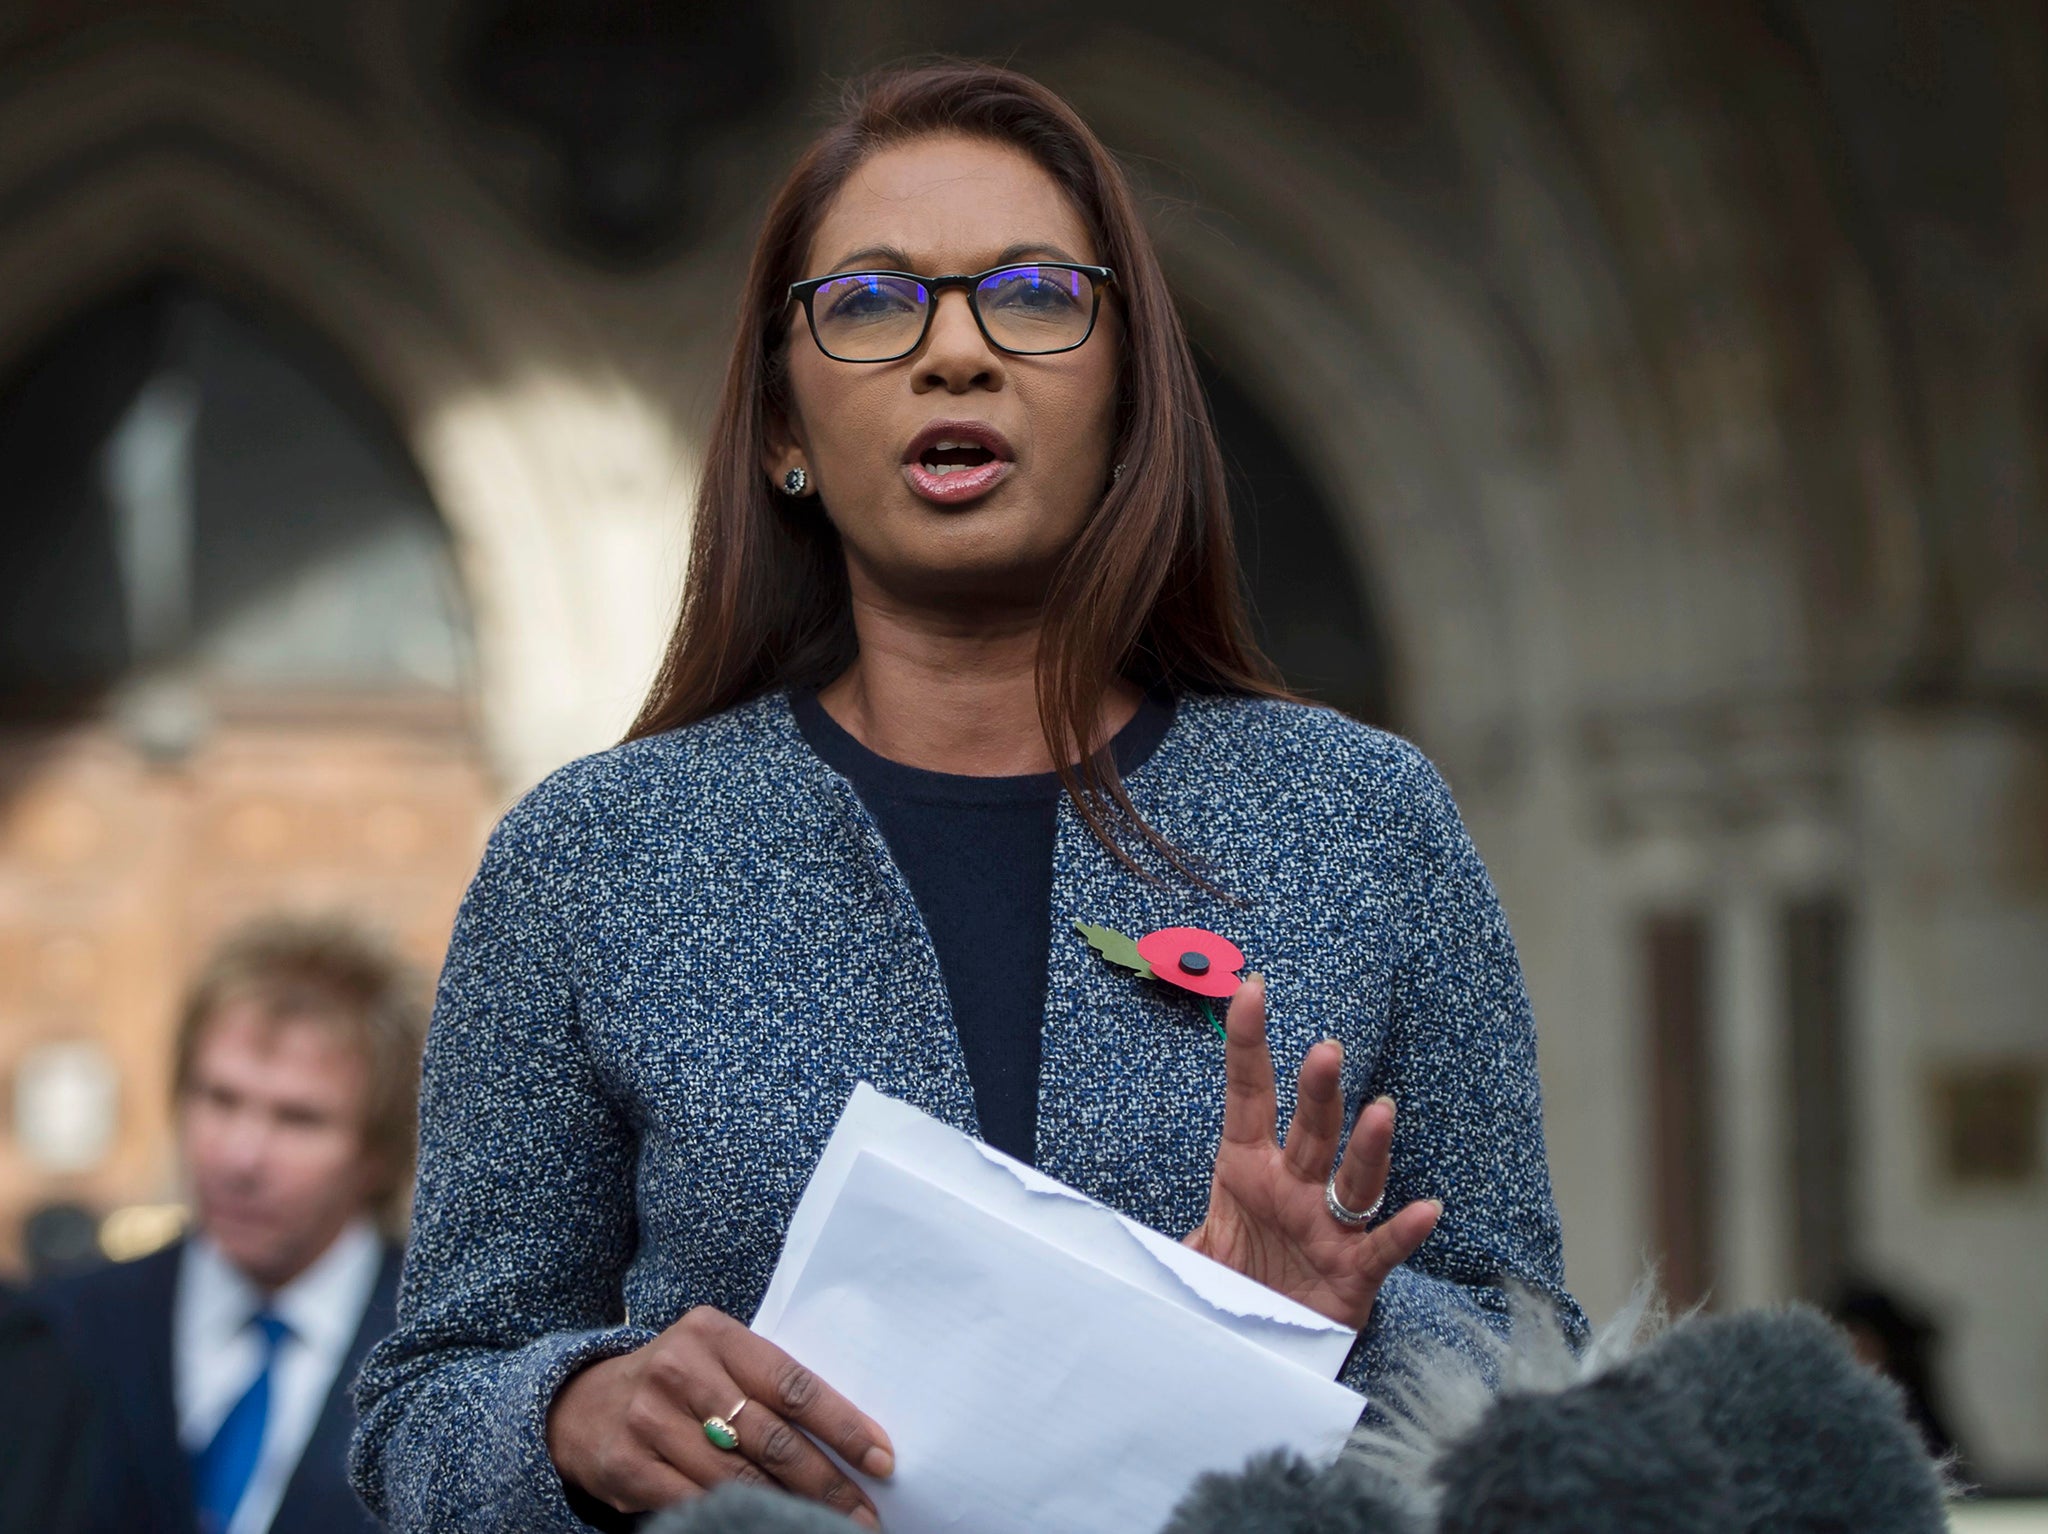 Lead claimant in the Article 50 case, Gina Miller, gives a statement outside of the High Court after a decision ruling in her favour